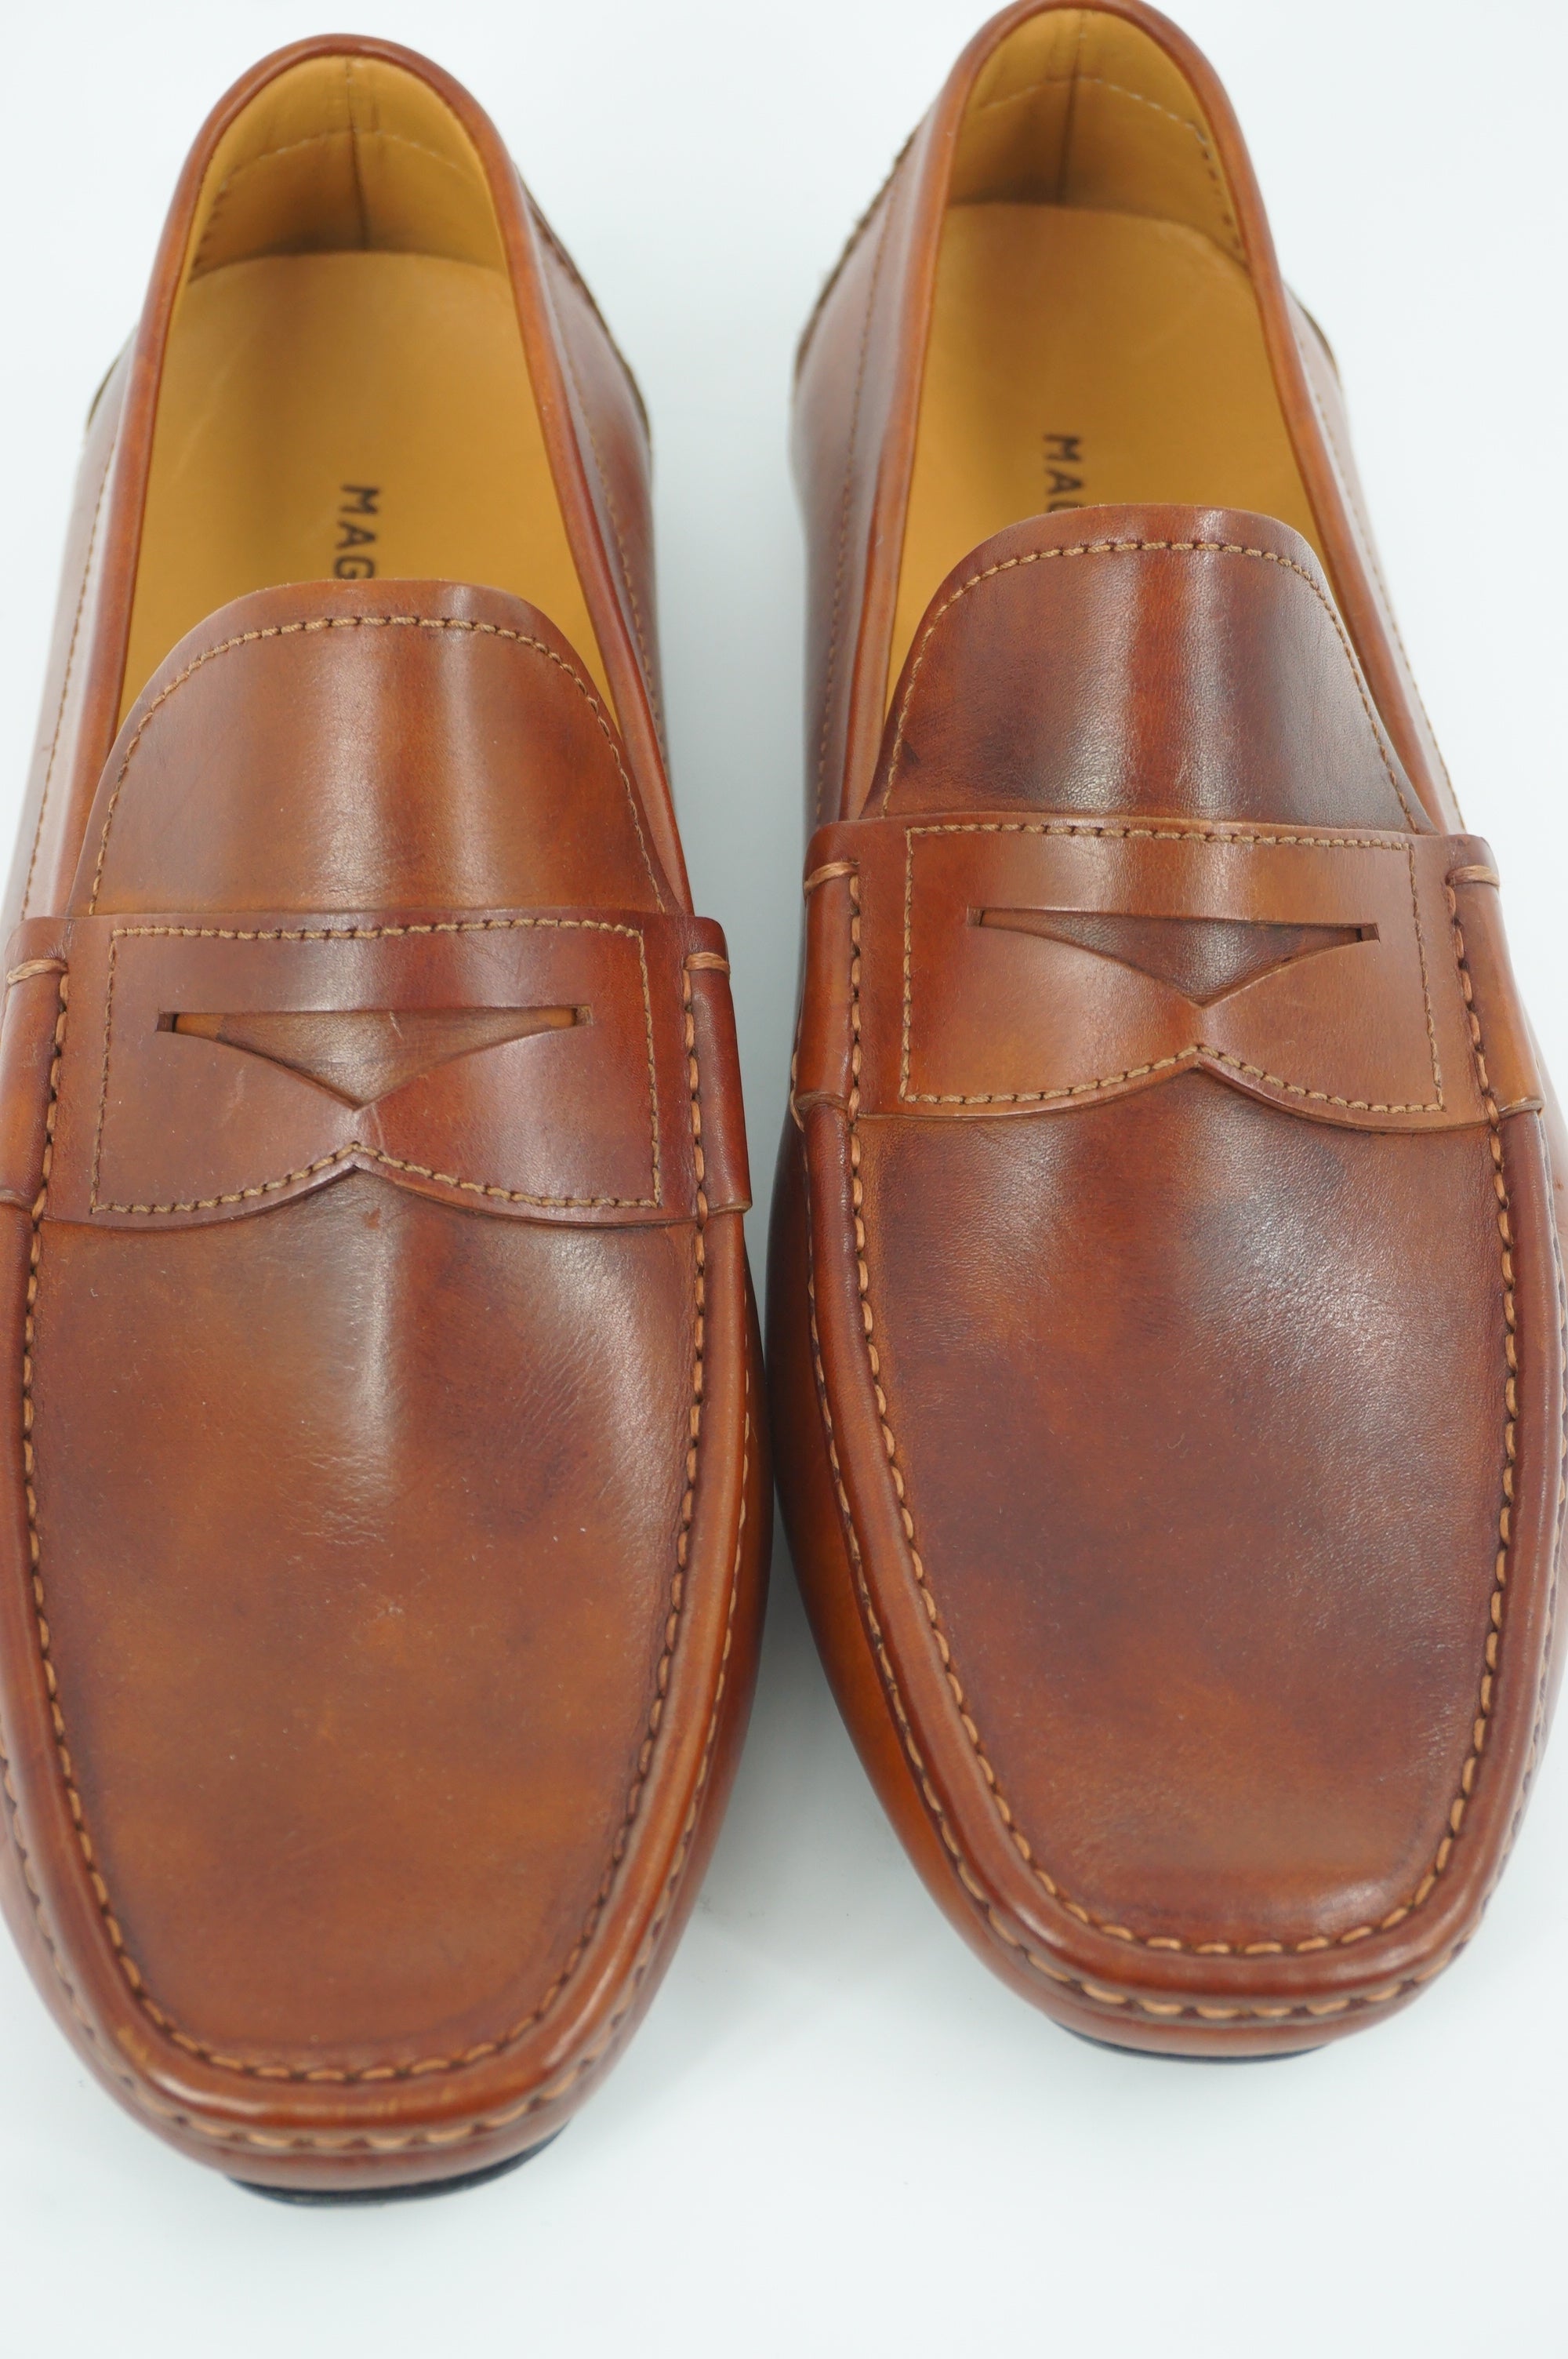 Magnanni Vance Penny Driving Loafers Size 9.5 Brown Leather $350 slip on NIB